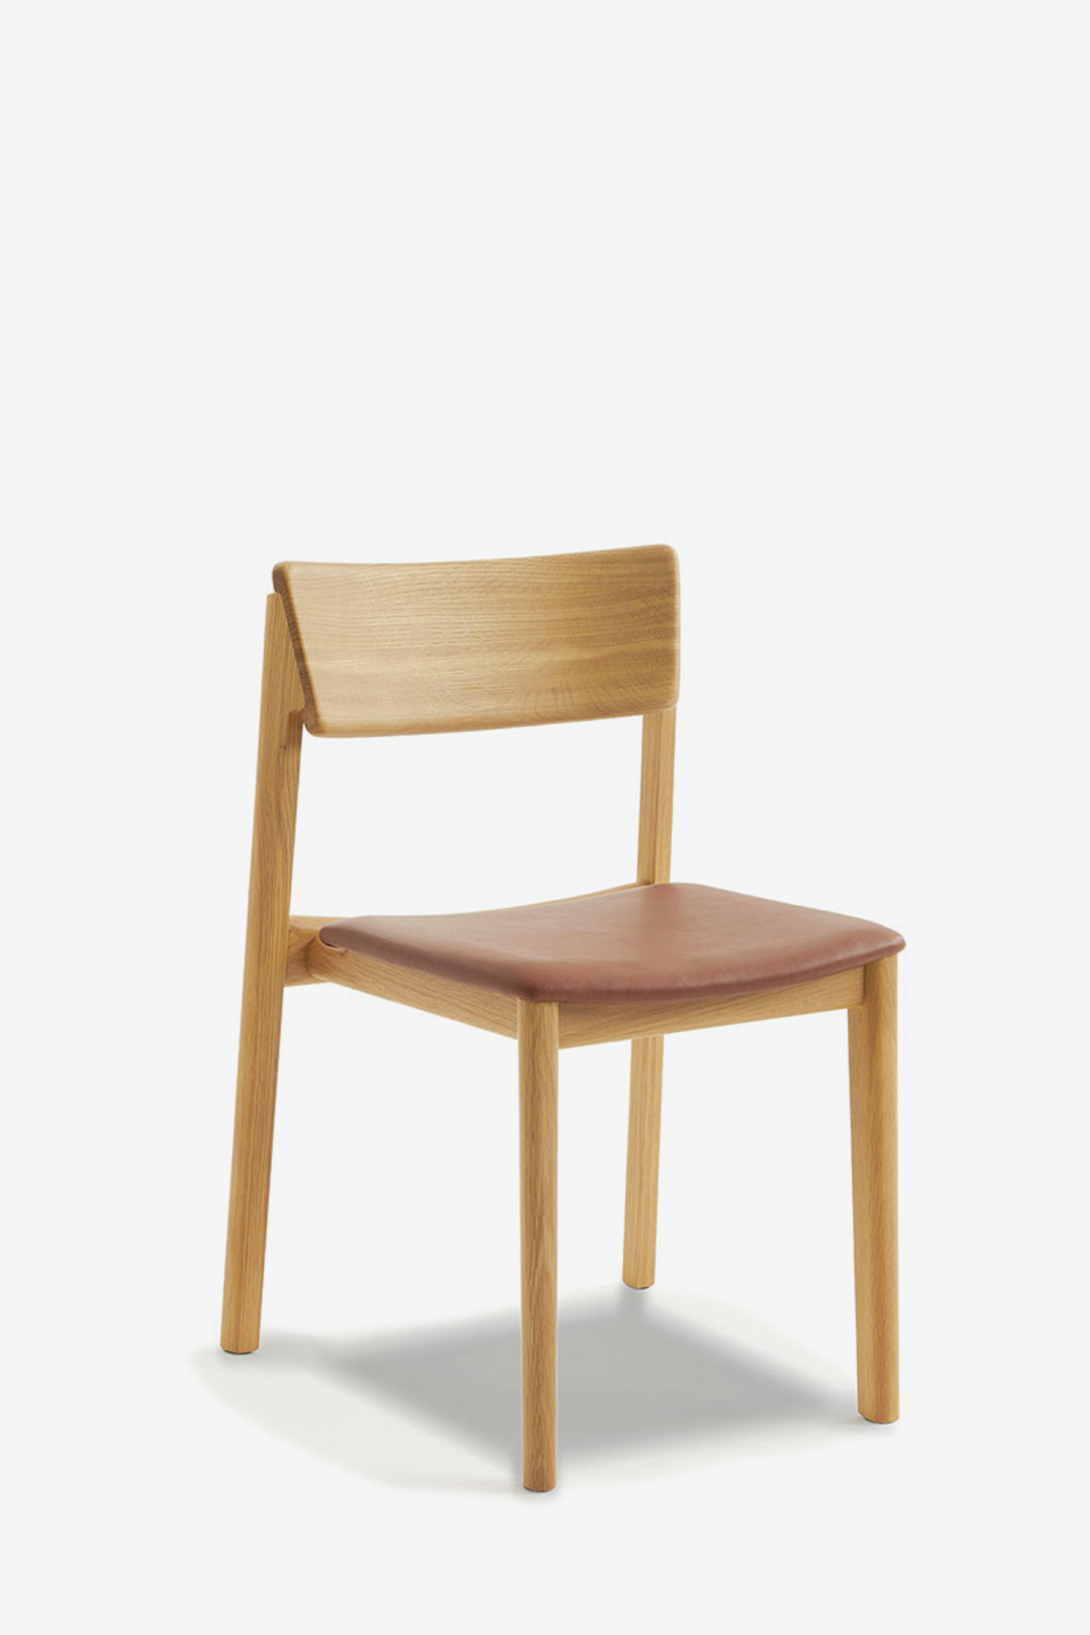 POISE chair ダイニングチェア ワークチェア レザーチェア 店舗什器